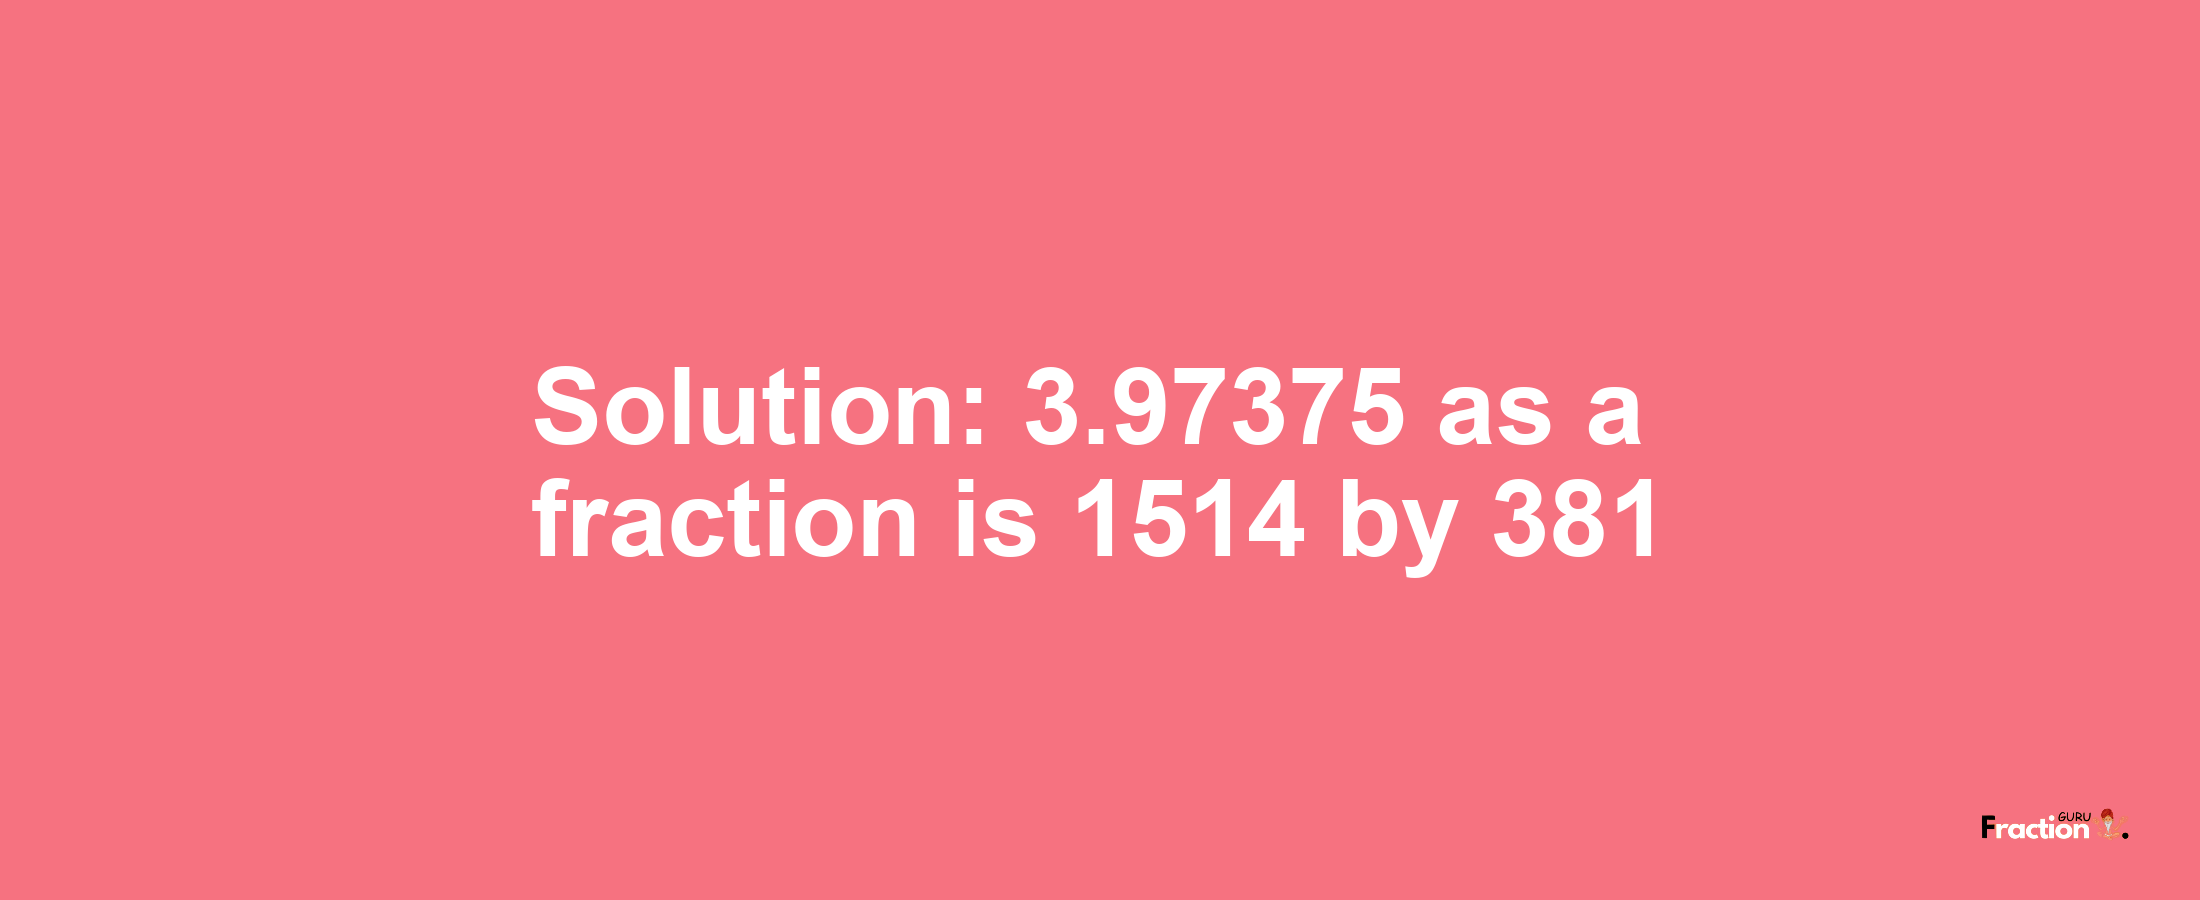 Solution:3.97375 as a fraction is 1514/381